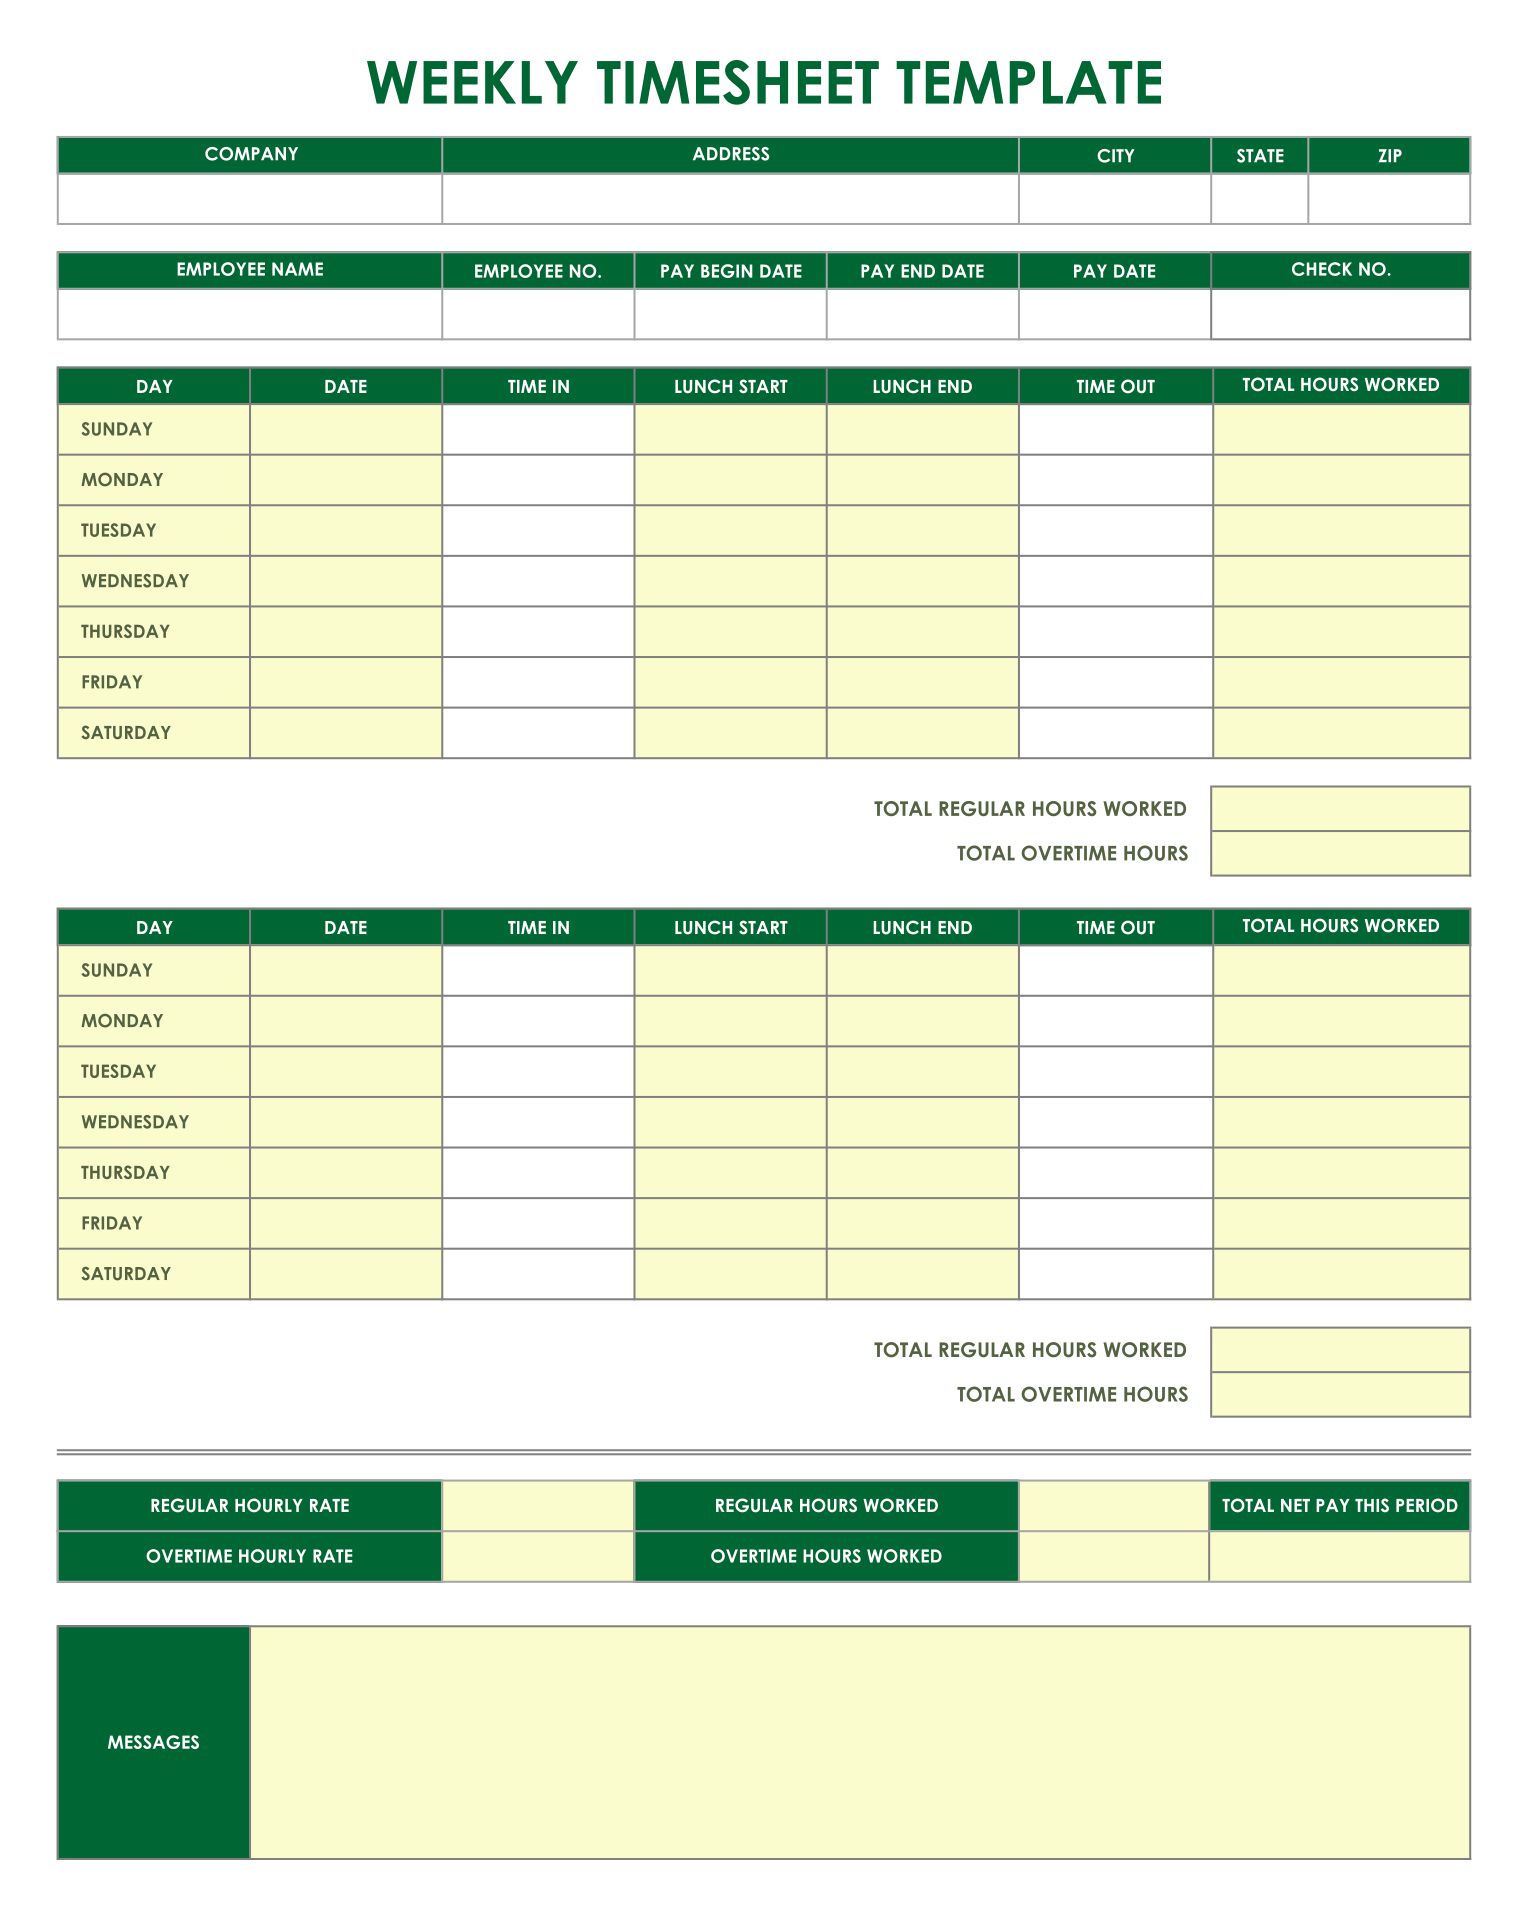 timesheet-with-breaks-excel-template-askxz